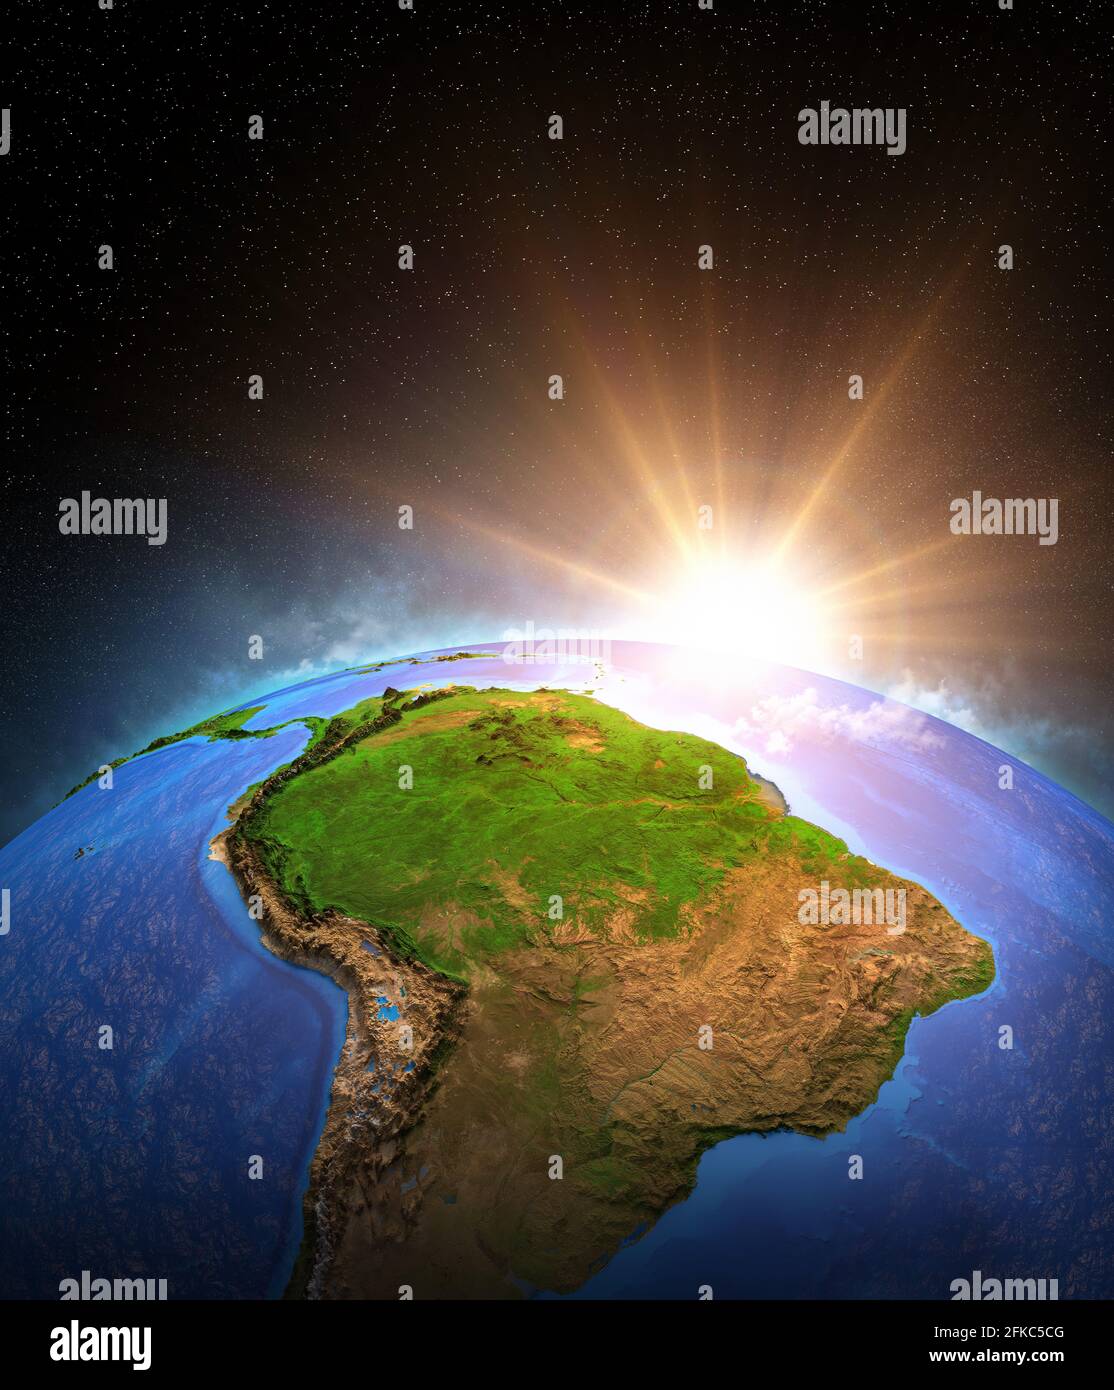 Warm sun shining over Planet Earth, focused on South America. Global warming on Amazon rainforest and Brazil. Elements furnished by NASA Stock Photo